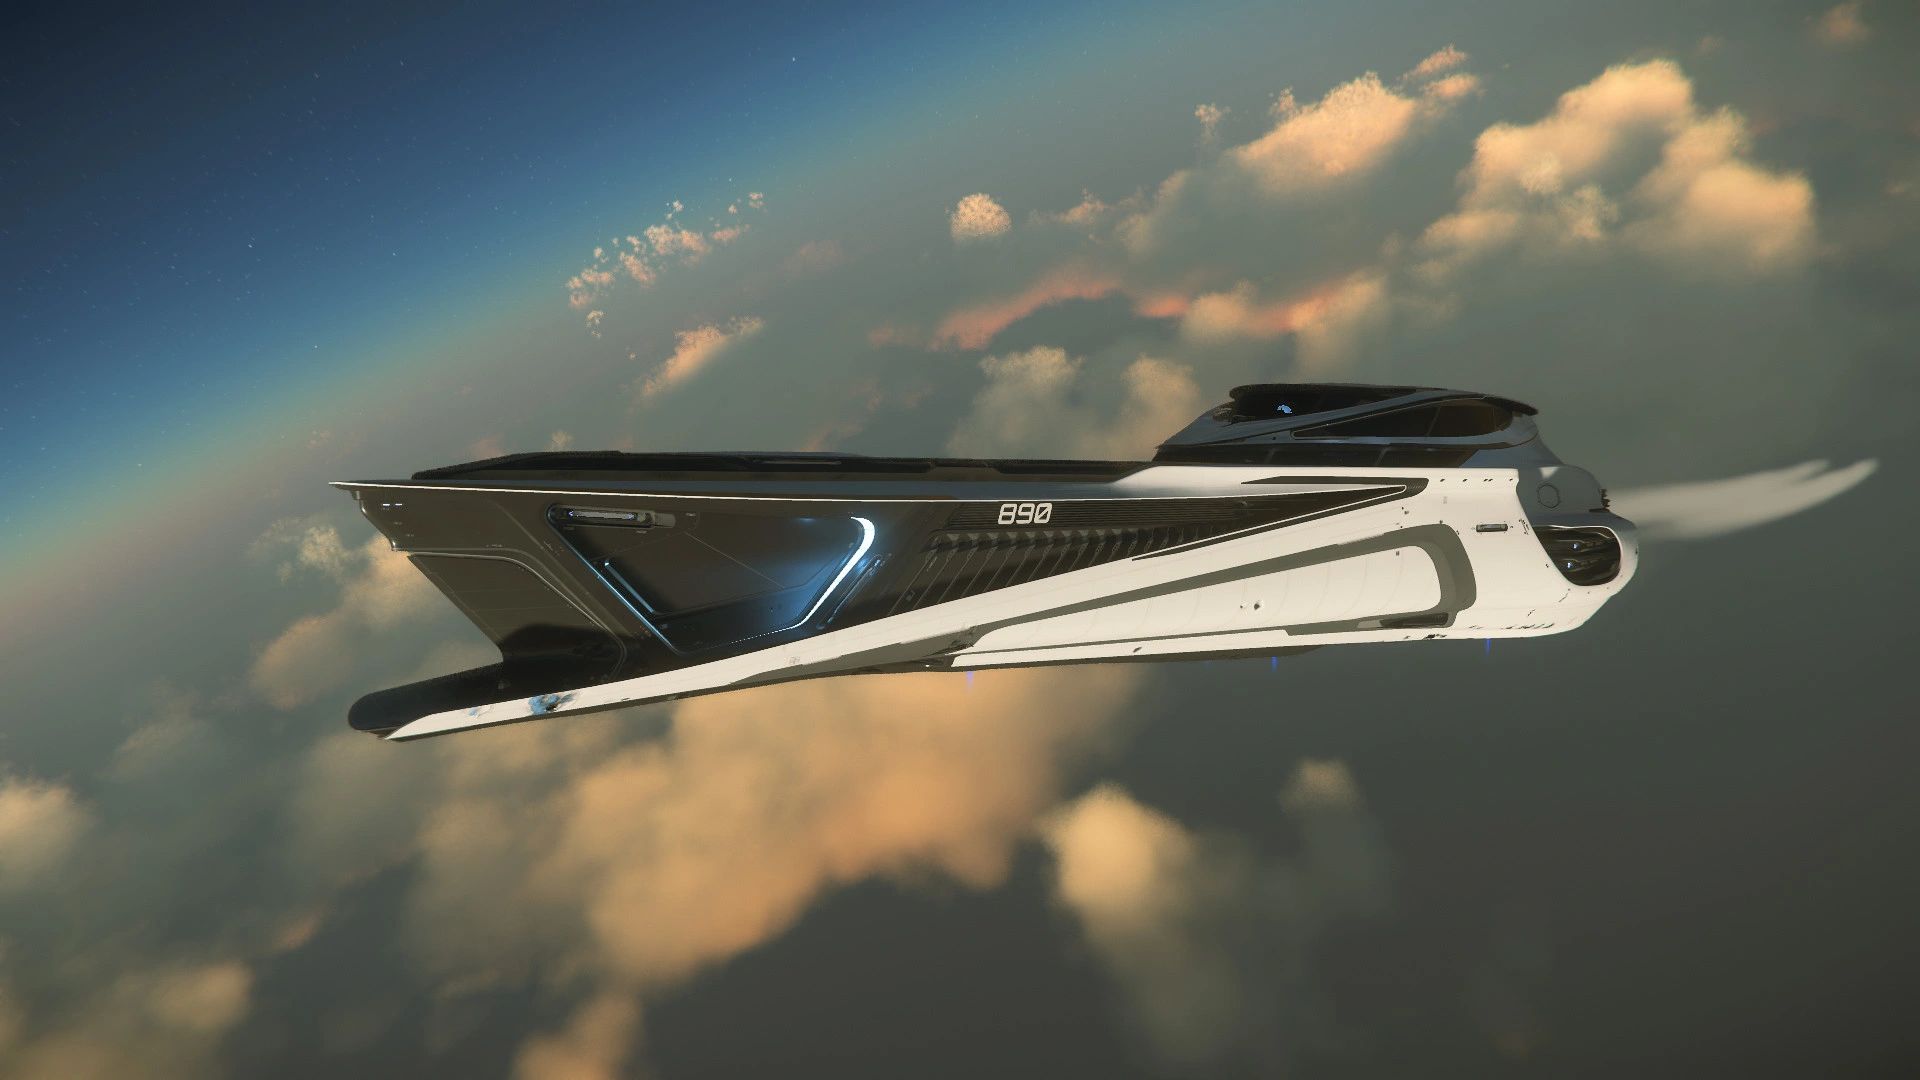 Star Citizen Reveals New Ships Ahead of Tomorrow's Free-to-Play Event